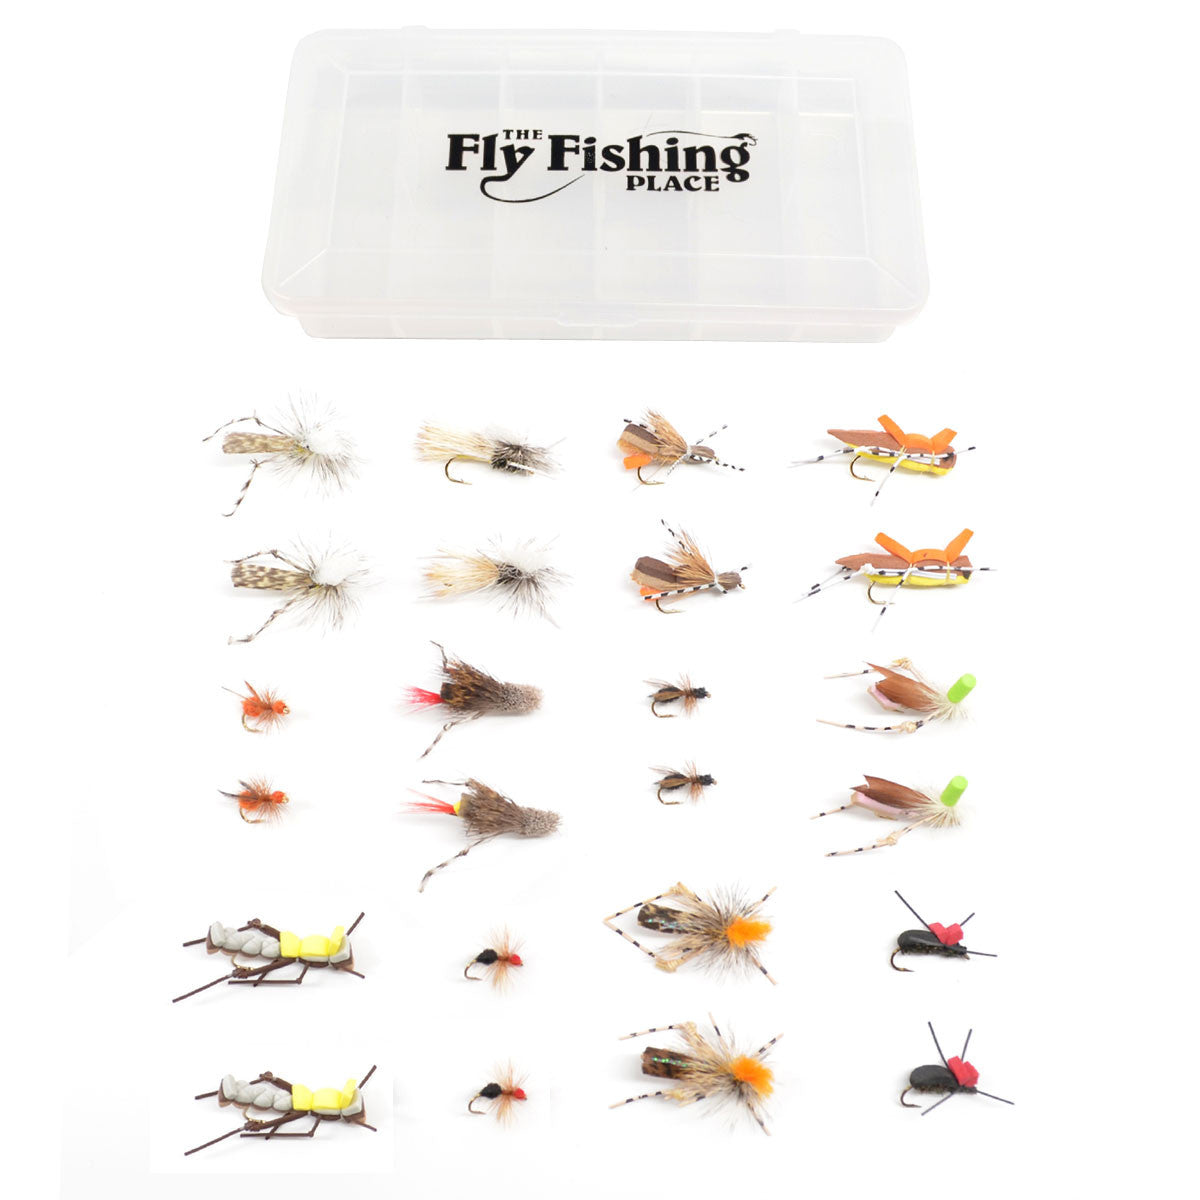 Trout Fly Assortment - Essential Terrestrials Fly Fishing Flies Collection - Includes Foam Hoppers, Ants, Beetles, and Cicadas - 2 Dozen Trout Flies with Fly Box